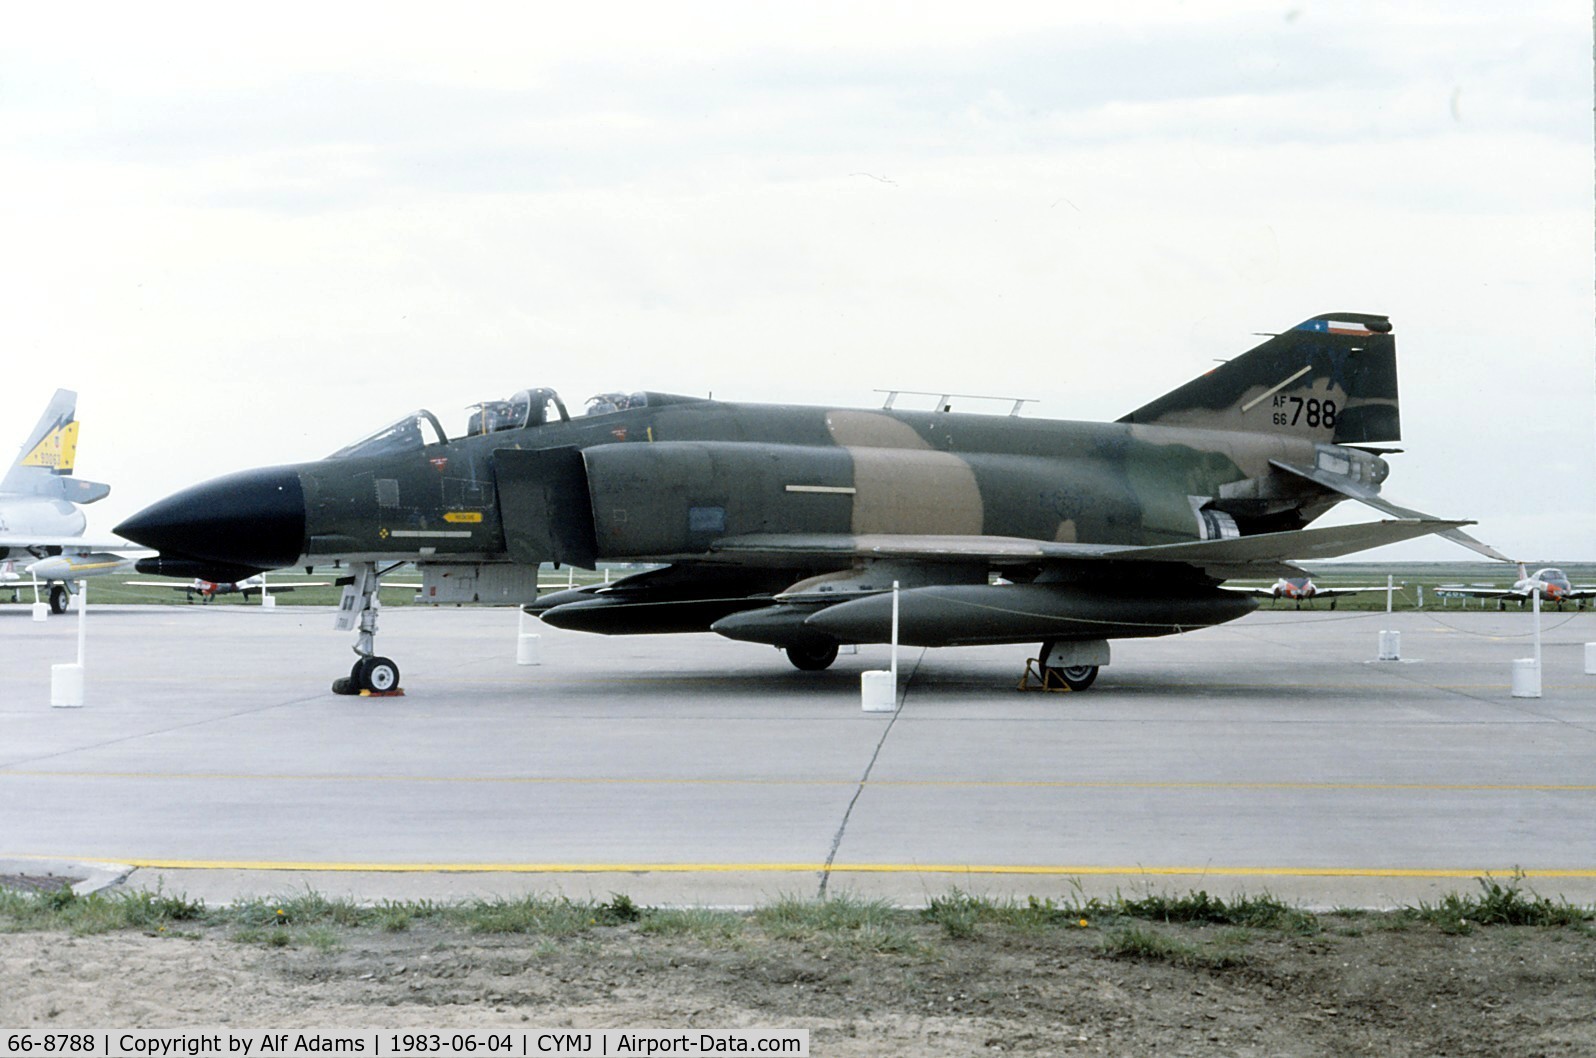 66-8788, 1966 McDonnell F-4D Phantom II C/N 2669, Photo shows F-4D 66-8788 in 1983 when it was on display at the Saskatchewan Airshow at Canadian Forces Base Moose Jaw, Saskatchewan, Canada.